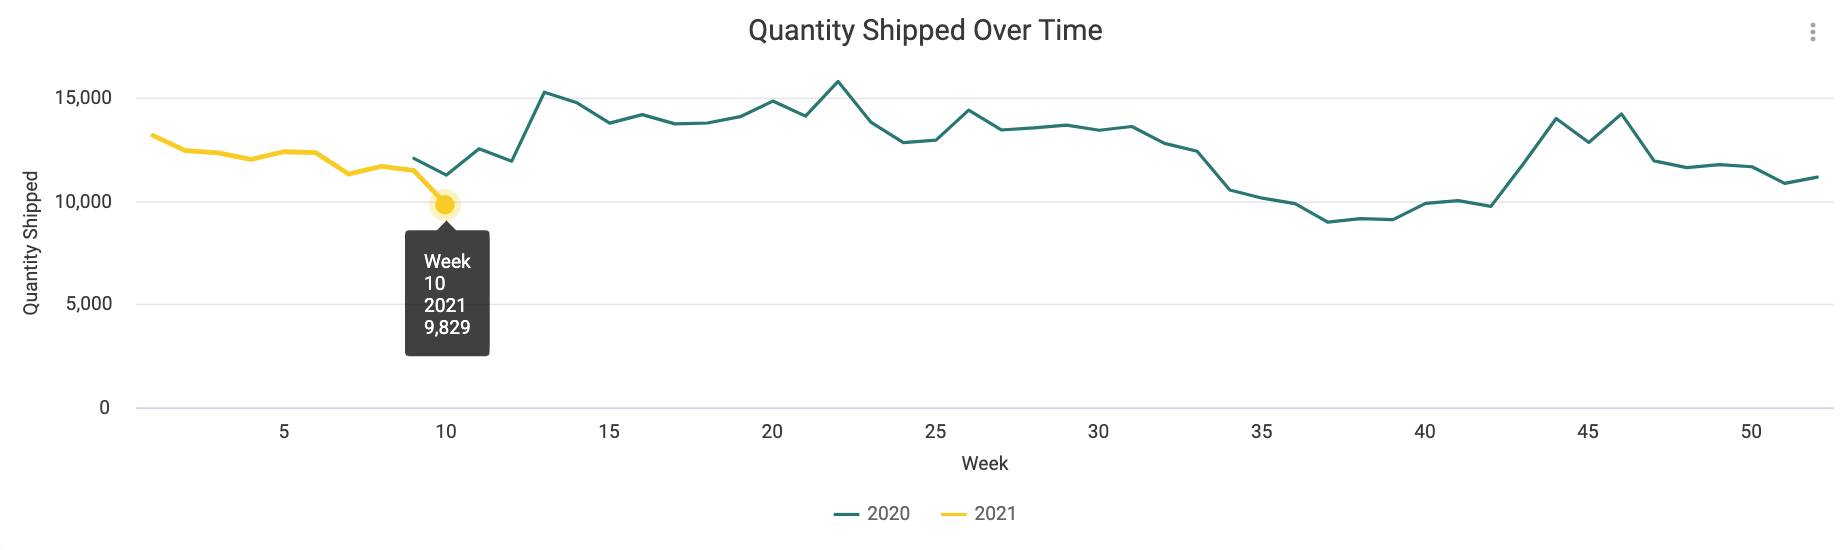 Quantity_Shipped_Over_Time.png